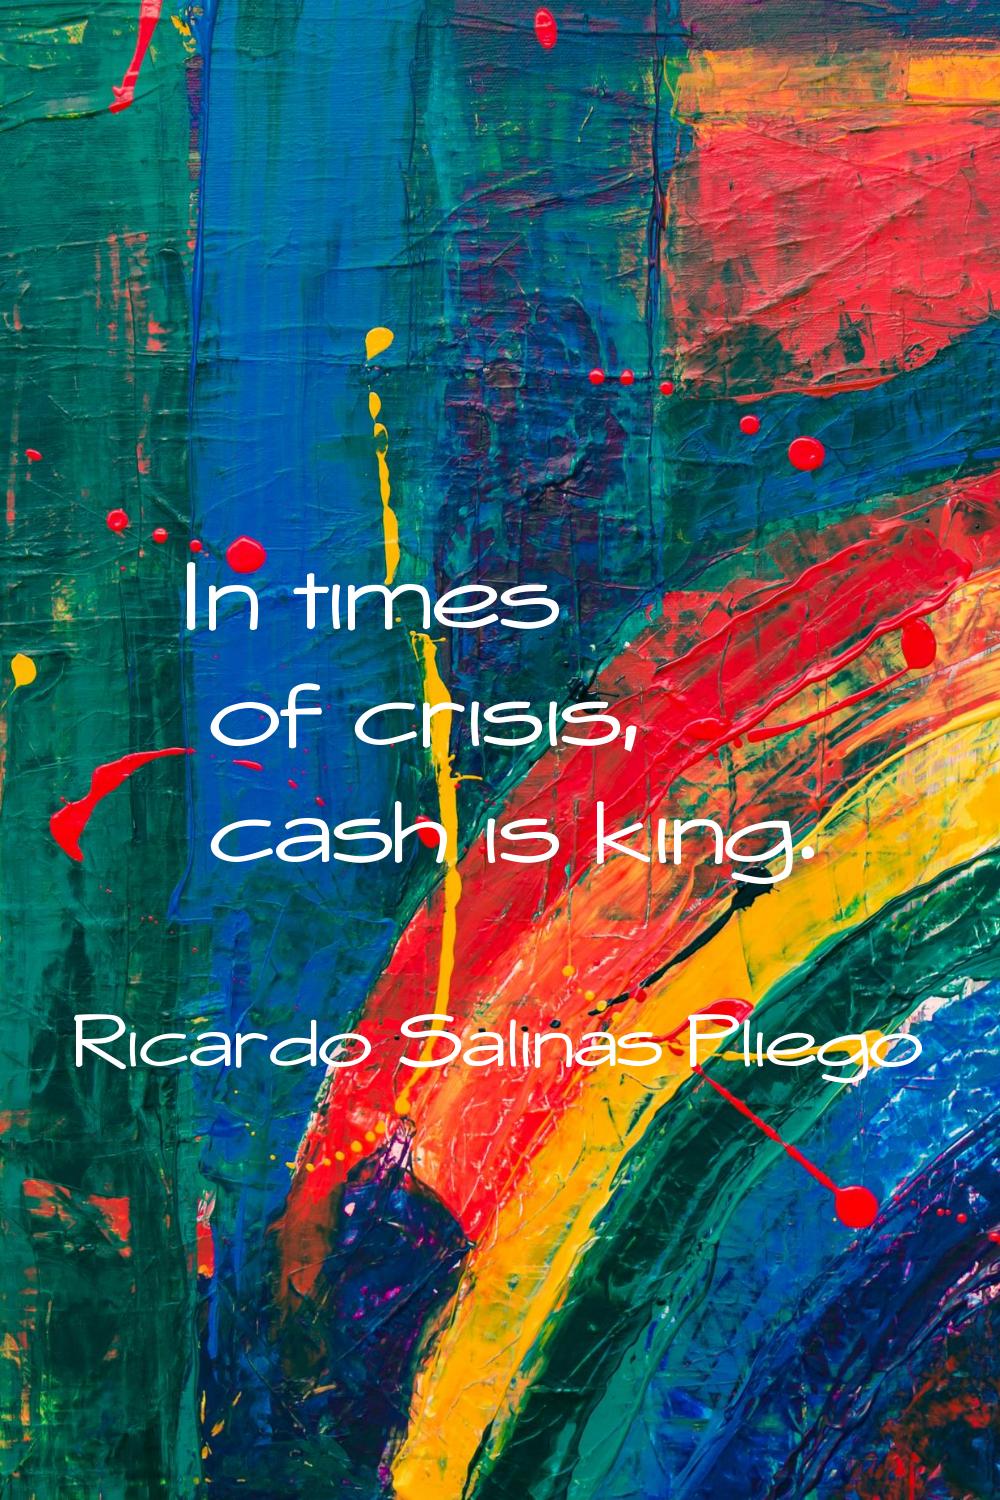 In times of crisis, cash is king.